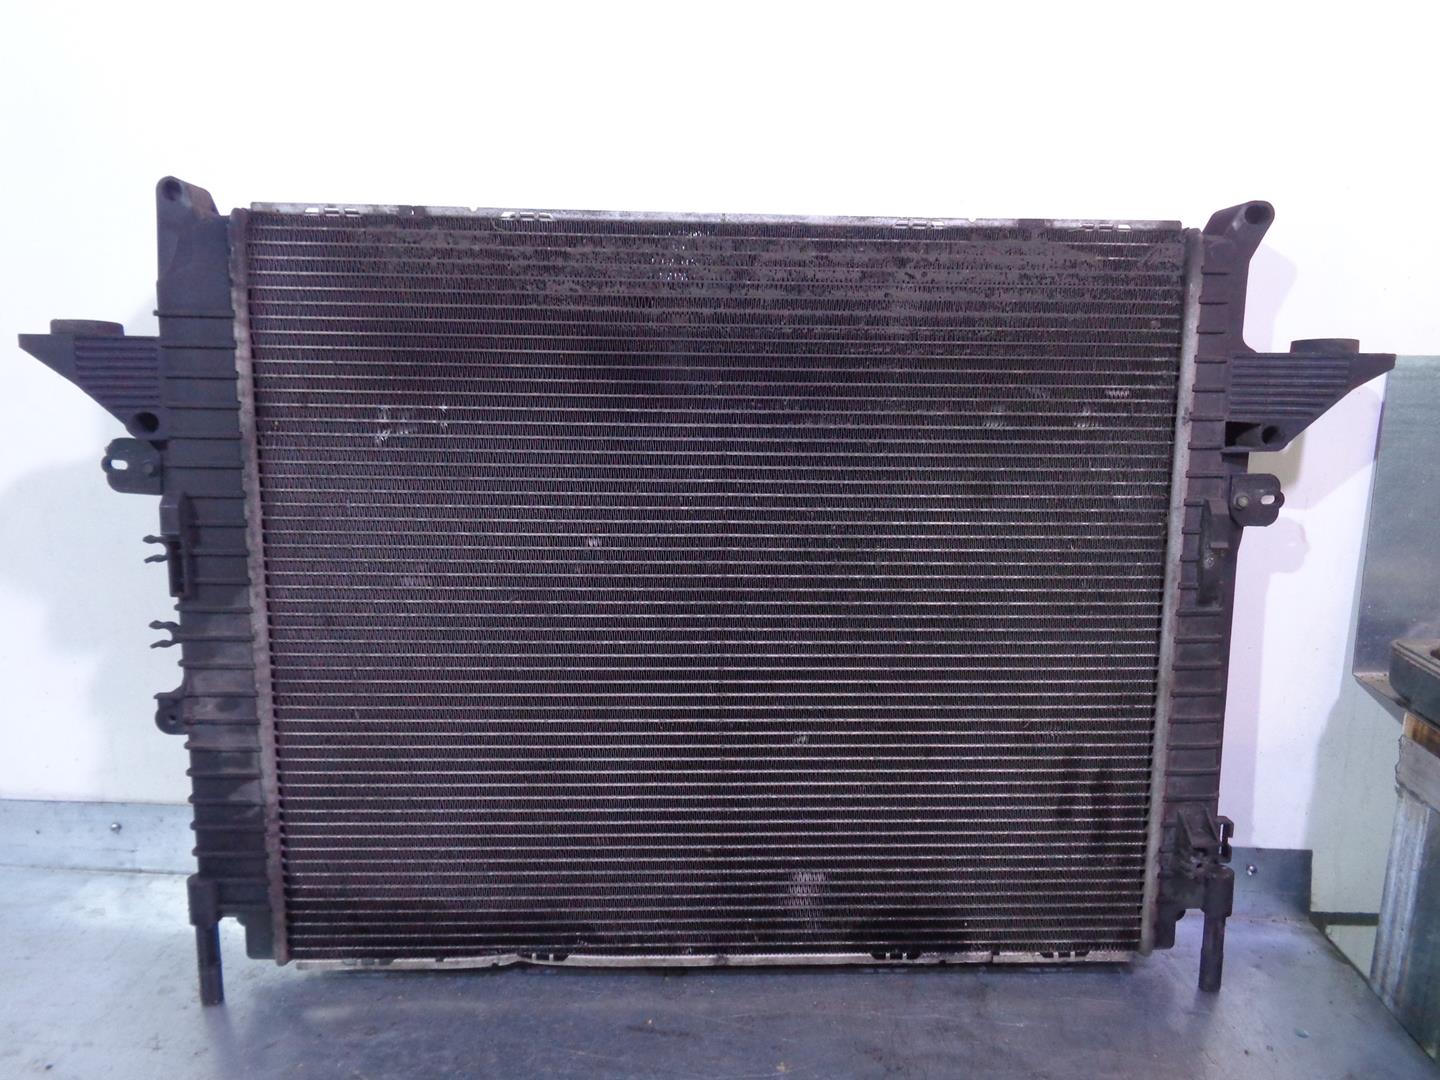 LAND ROVER Discovery 4 generation (2009-2016) Air Con Radiator PCC500112, L25951, CALSONICKANSEI 21103786